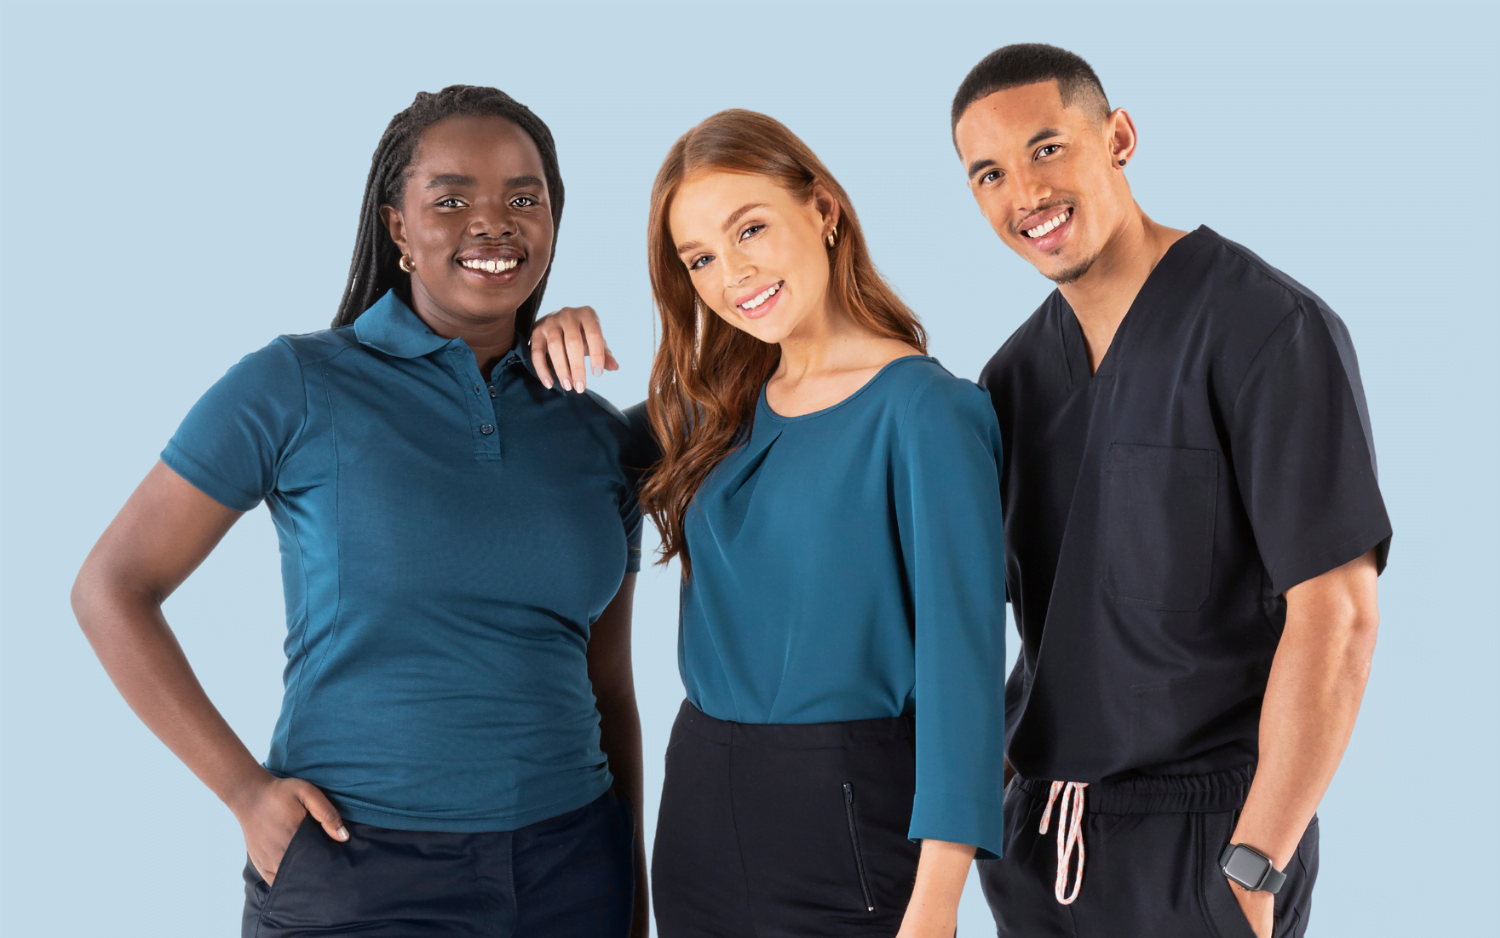 The banner for the article '3 Mistakes to Avoid When Choosing a Uniform Supplier' depicts three young, professional looking models wearing stylish, high-quality blue and navy uniforms manufactured by Designs To You. They're smiling confidently at the camera and standing in front of a a light blue background.